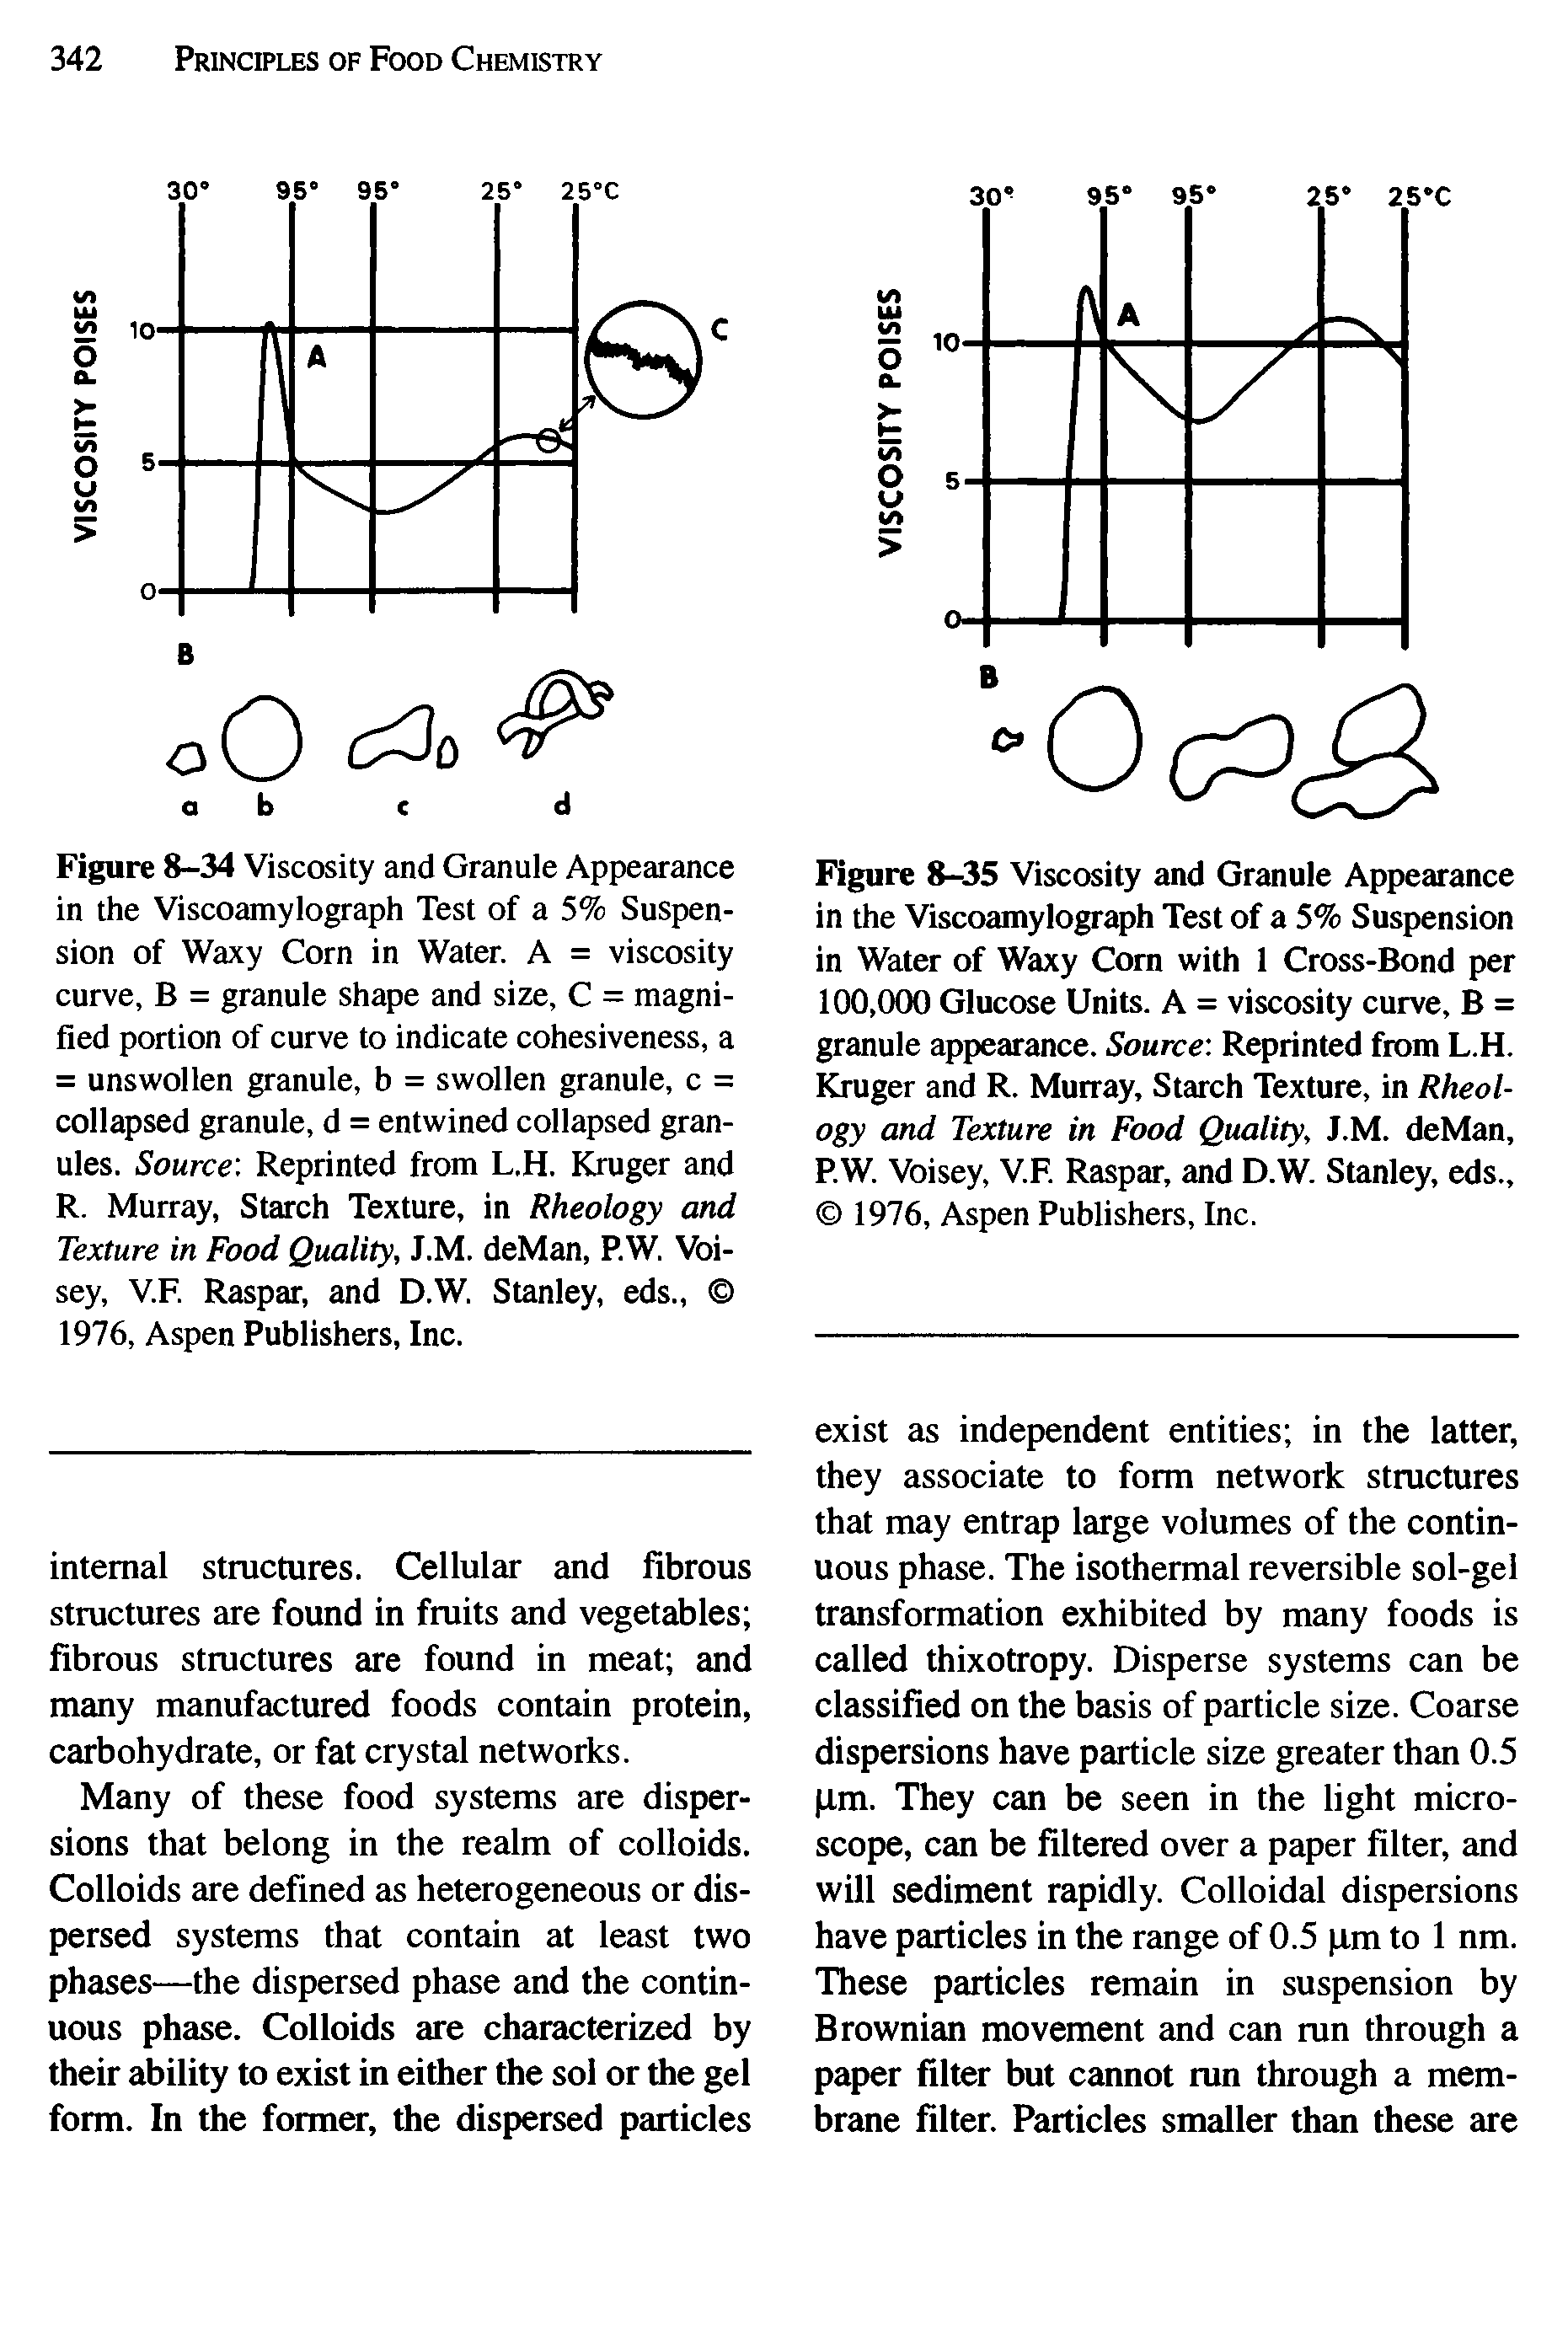 Figure 8-35 Viscosity and Granule Appearance in the Viscoamylograph Test of a 5% Suspension in Water of Waxy Corn with 1 Cross-Bond per 100,000 Glucose Units. A = viscosity curve, B = granule appearance. Source Reprinted from L.H. Kruger and R. Murray, Starch Texture, in Rheology and Texture in Food Quality, J.M. deMan, P.W. Voisey, V.F. Raspar, and D.W. Stanley, eds., 1976, Aspen Publishers, Inc.